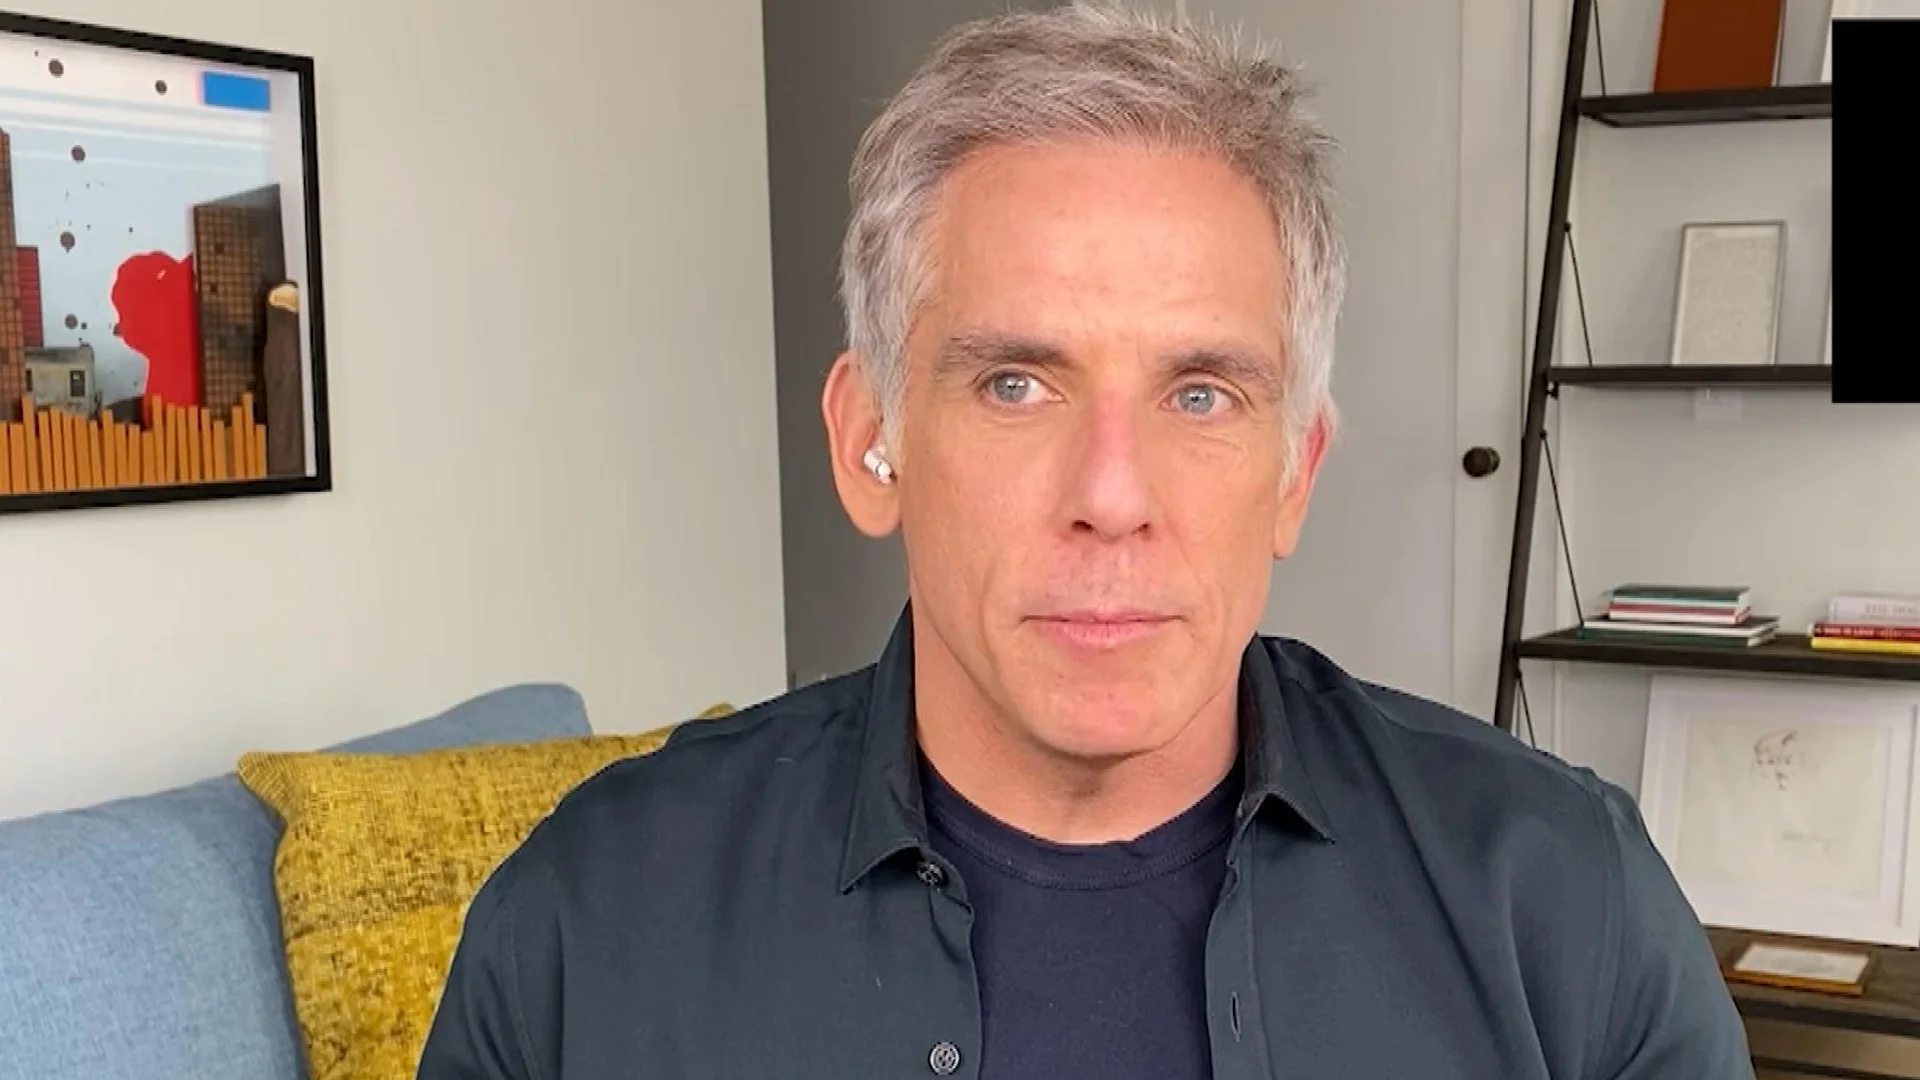 Ben Stiller Refuses to Apologize for His Most Controversial Movie and Says He’s ‘Proud of It’